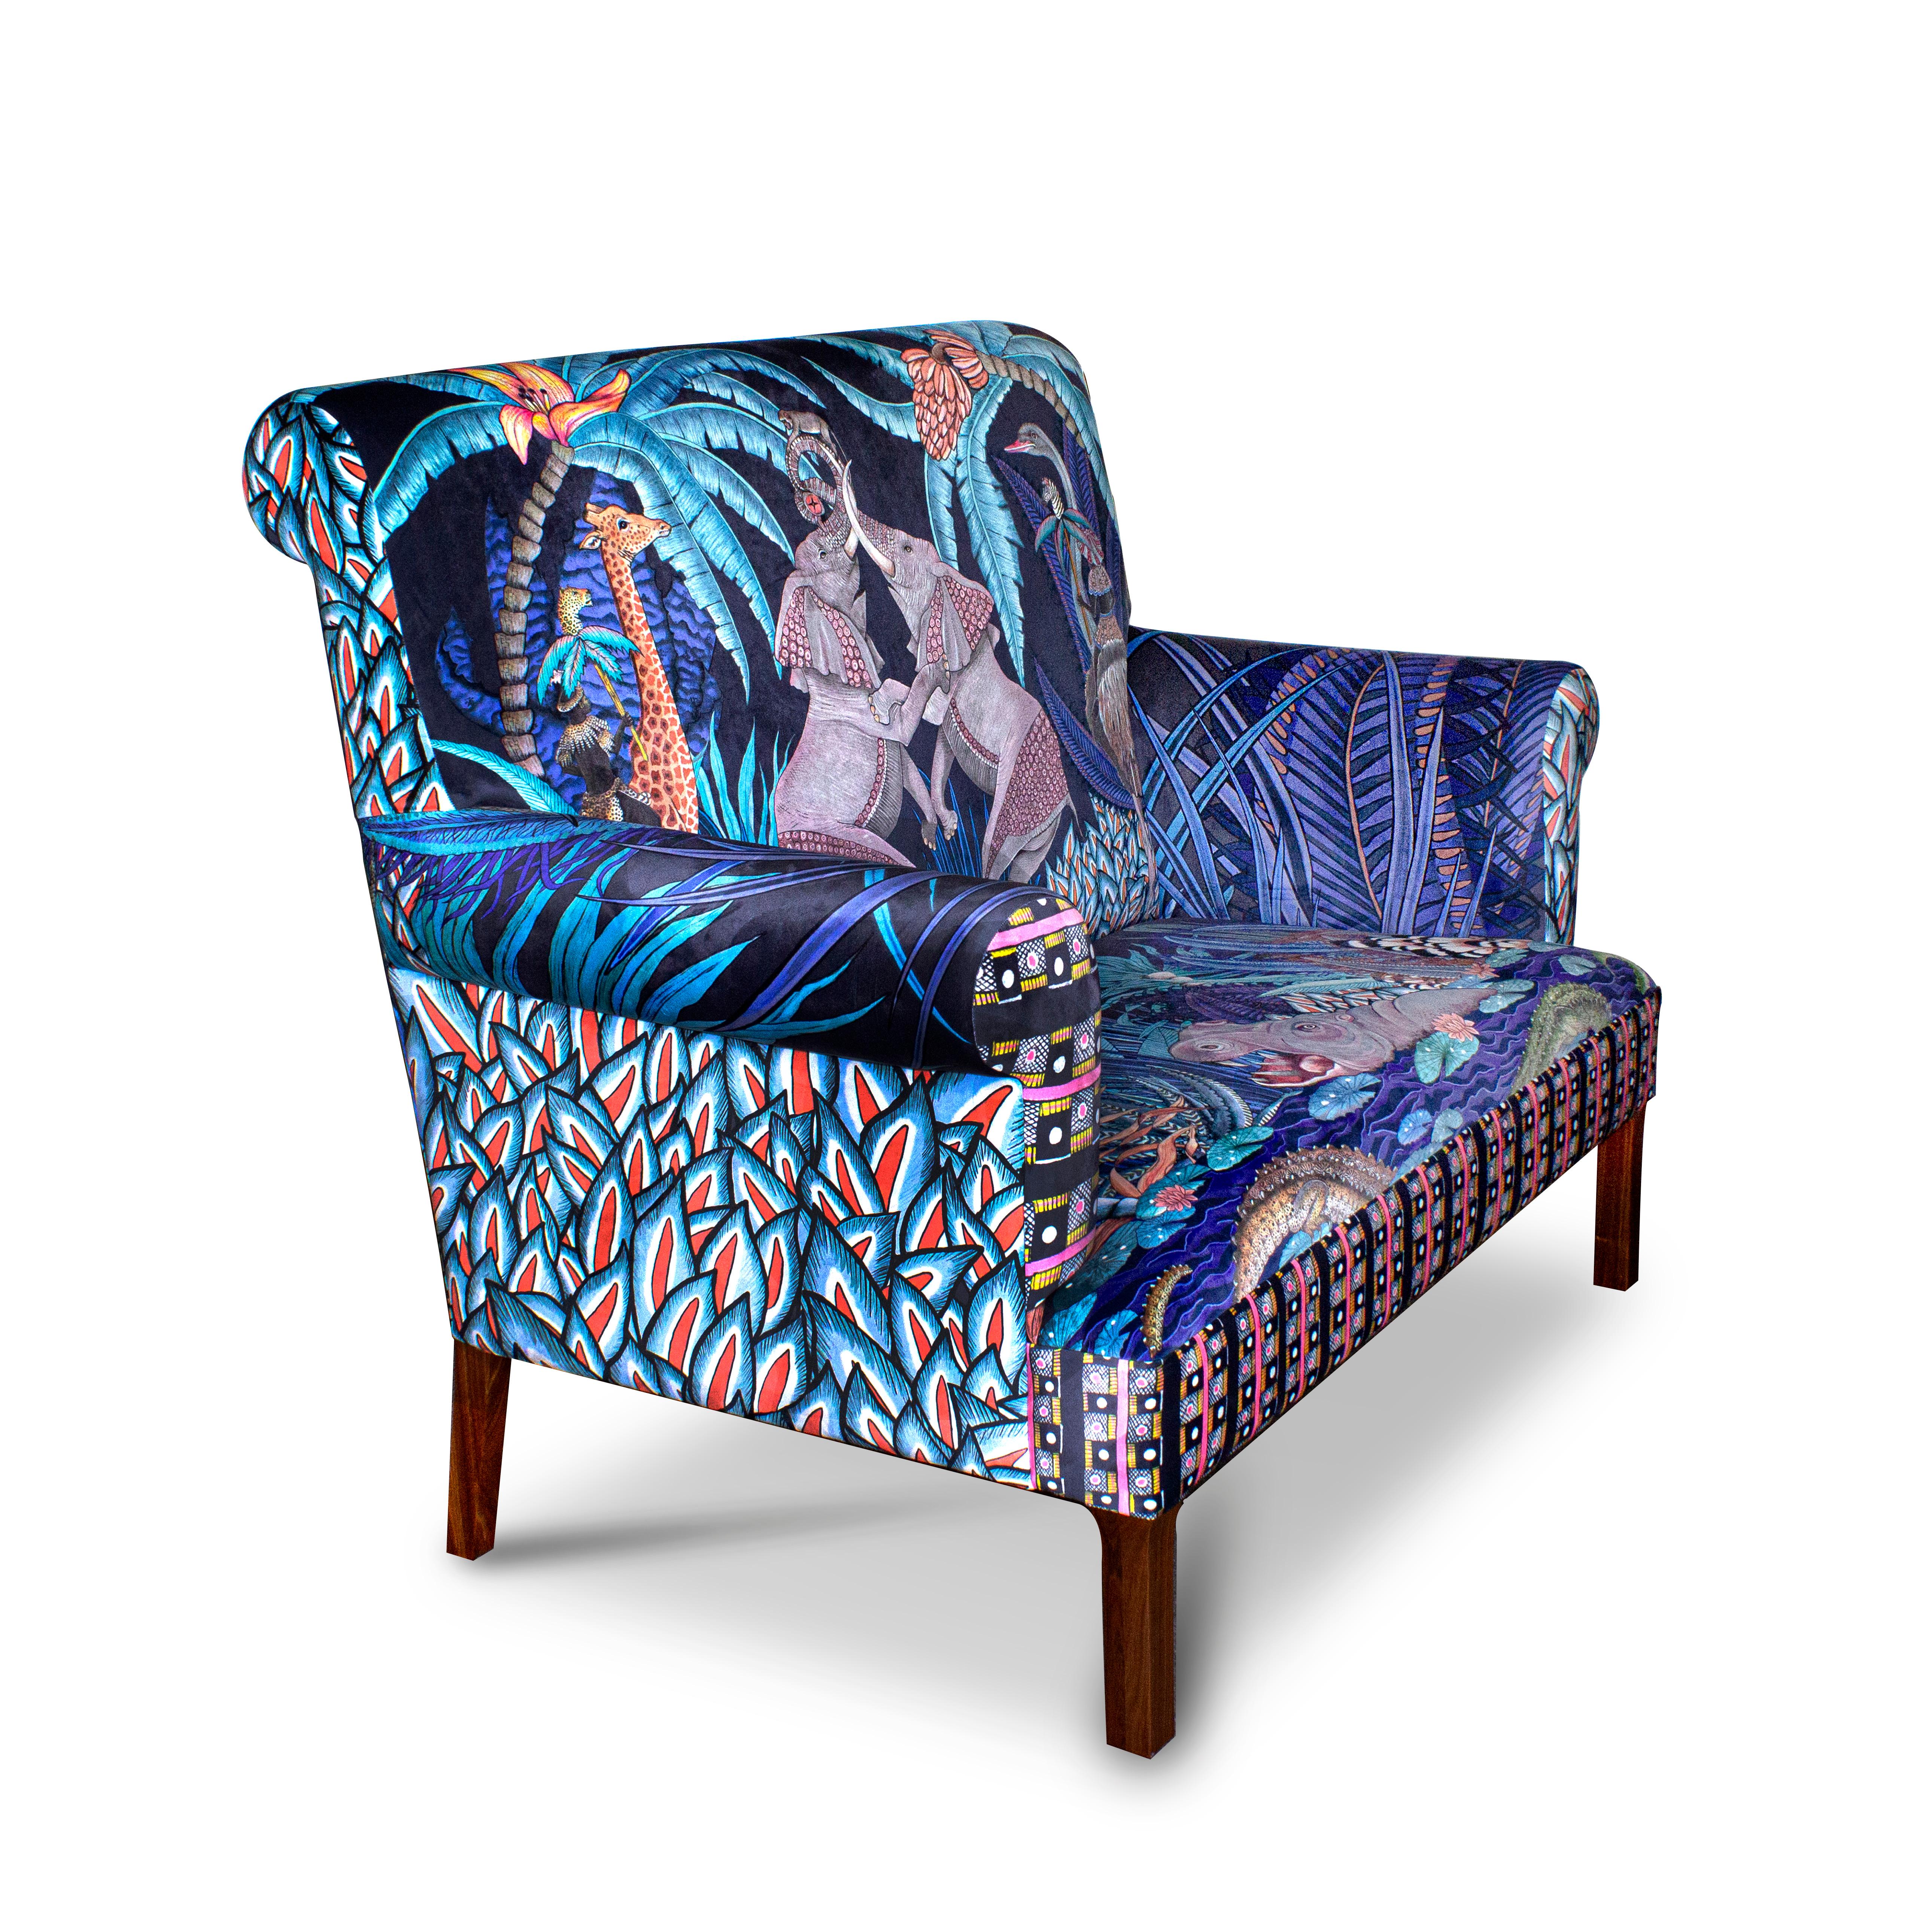 Ardmore designers have given us two signature limited edition sofas with the launch of our Sabie fabric collection 2020, that come 30 in Tanzanite and 30 in Delta, both in a rich and sensual velvet. The high backs allow allow for two to sit amongst